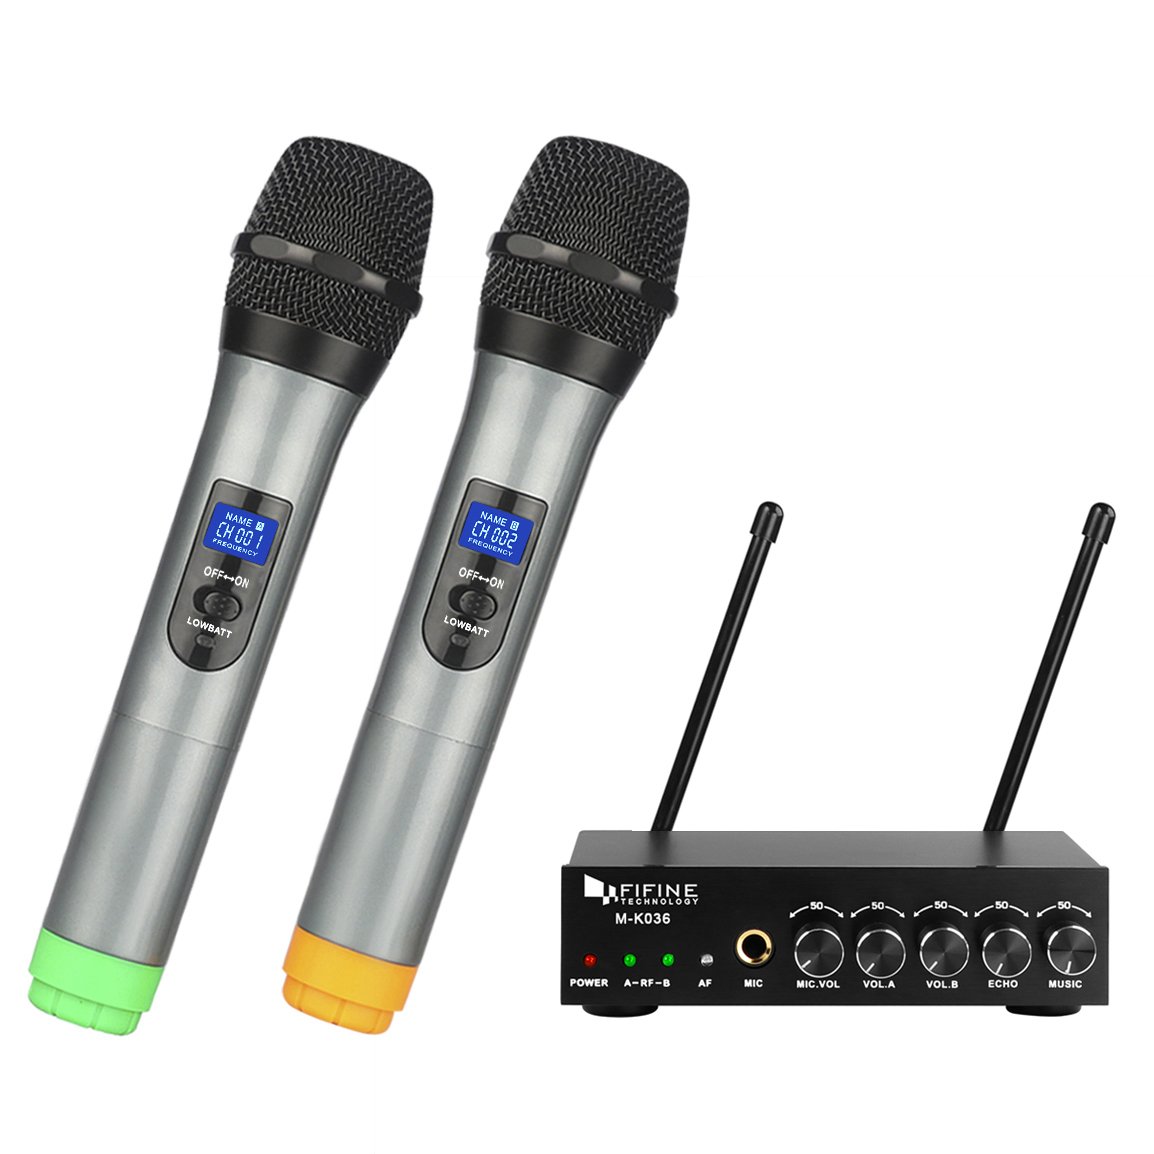 Wireless Microphone System for rent in Austin Texas from Austin Bounce House Rentals